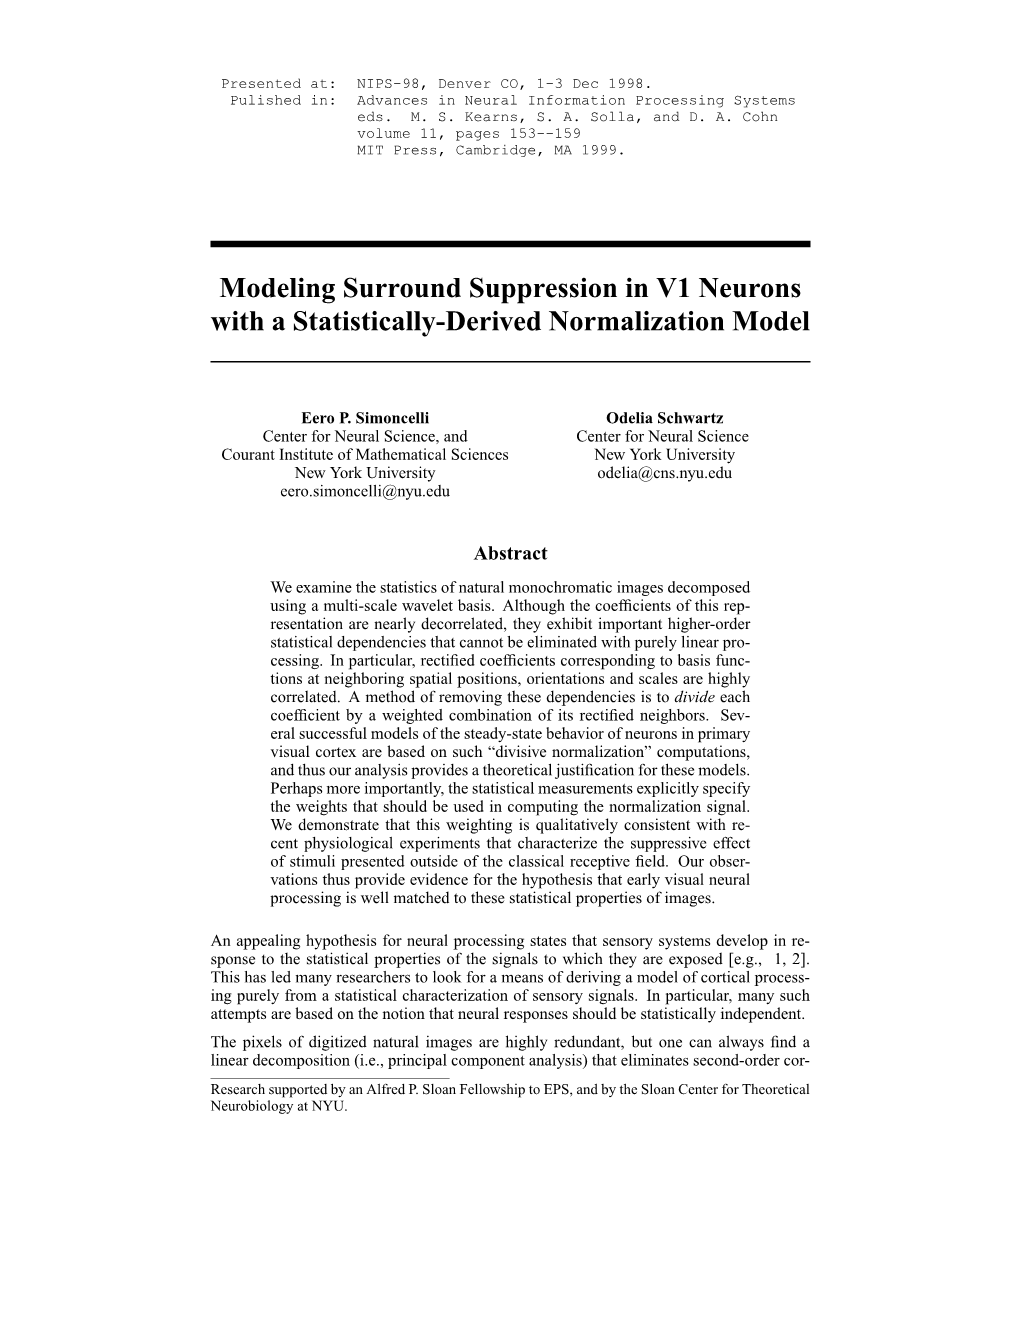 Modeling Surround Suppression in V1 Neurons with a Statistically-Derived Normalization Model